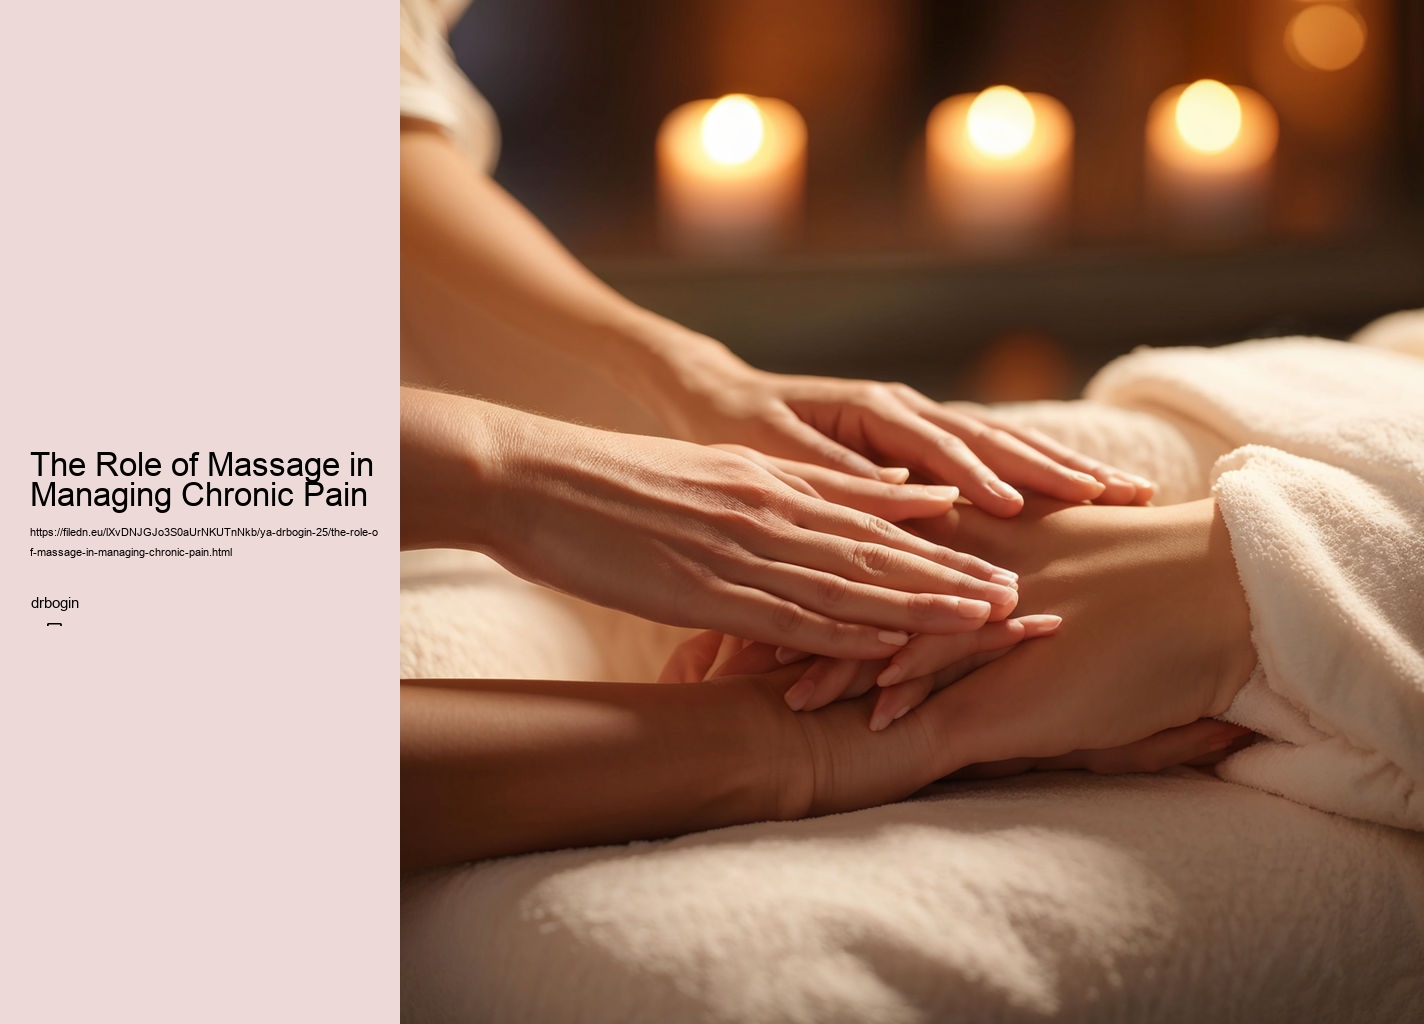 The Role of Massage in Managing Chronic Pain